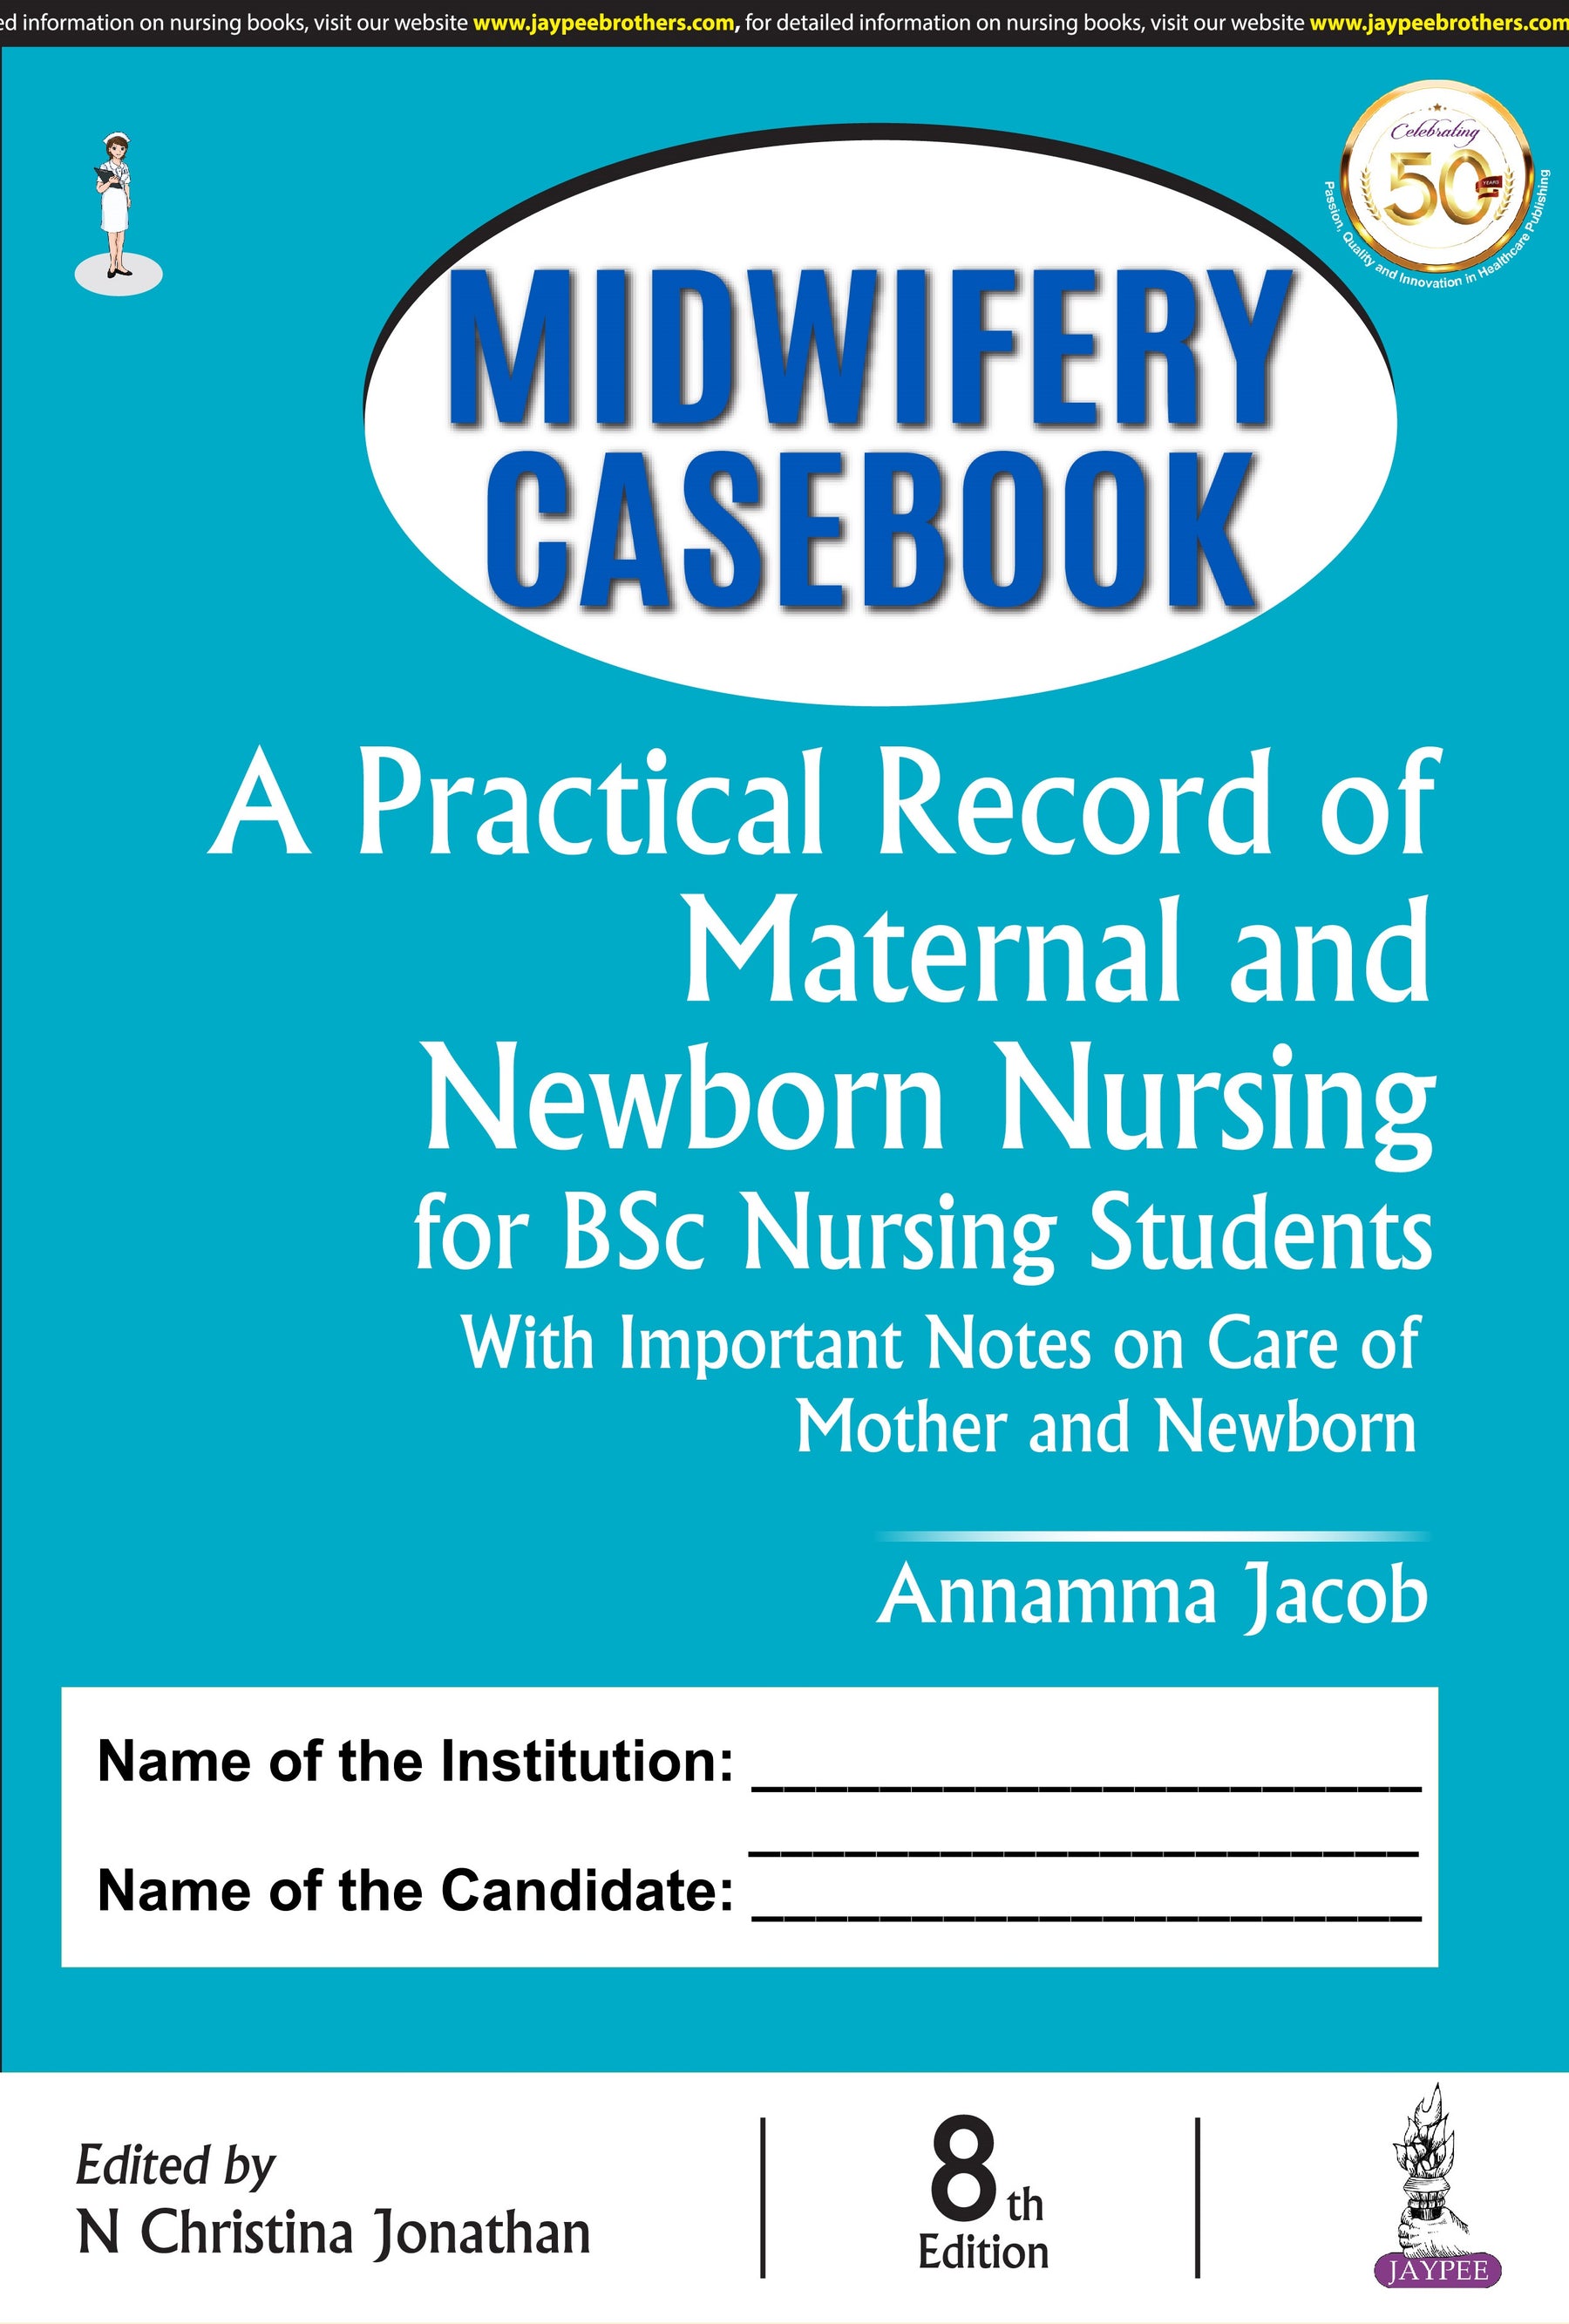 MIDWIFERY CASEBOOK A PRACTICAL RECORD OF MATERNAL AND NEWBORN NURSING (FOR BSC NURSING STUDENTS),8/E,ANNAMMA JACOB